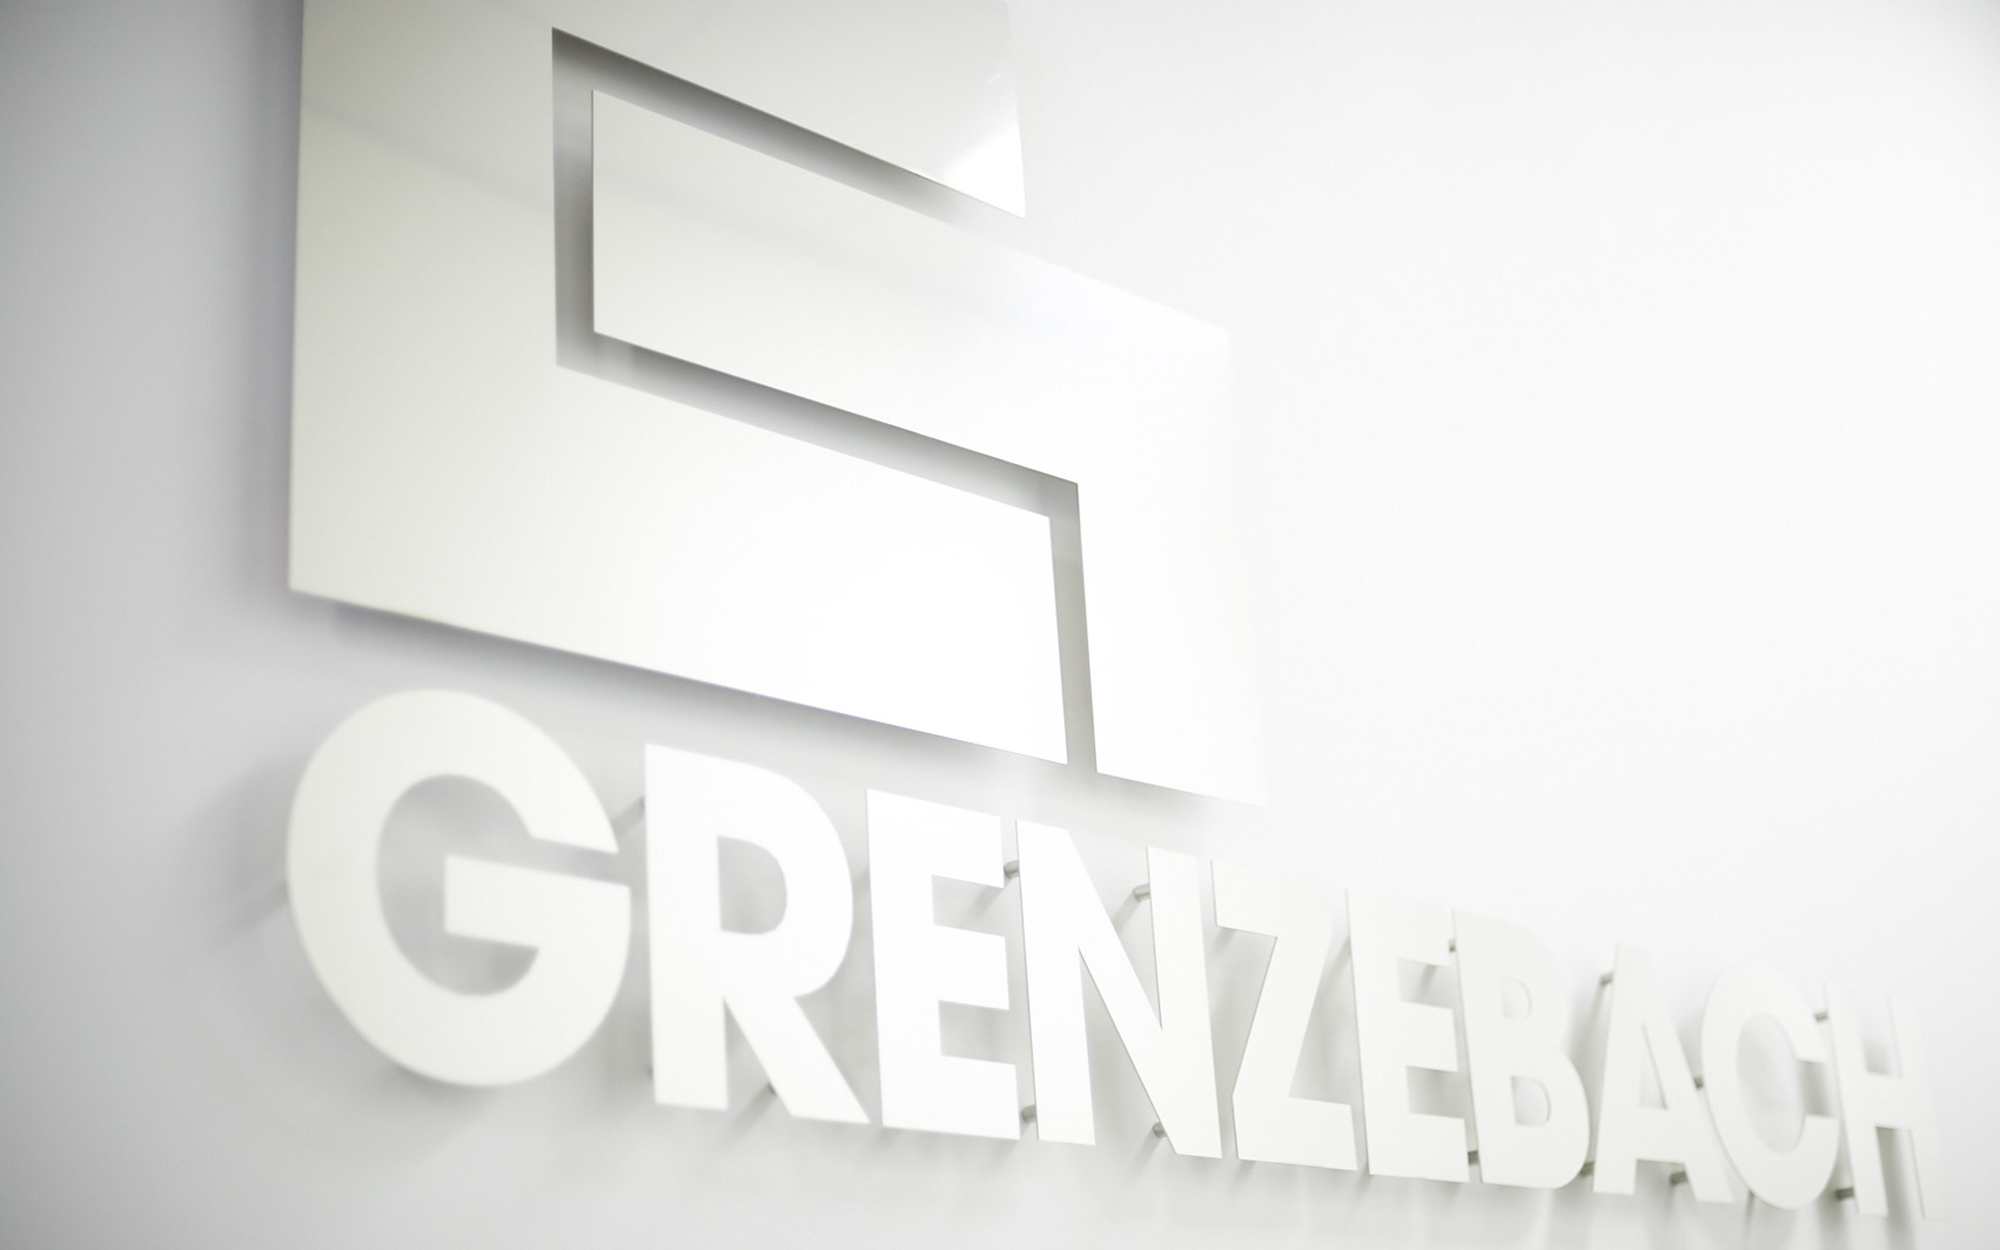 Grenzebach on course of growth